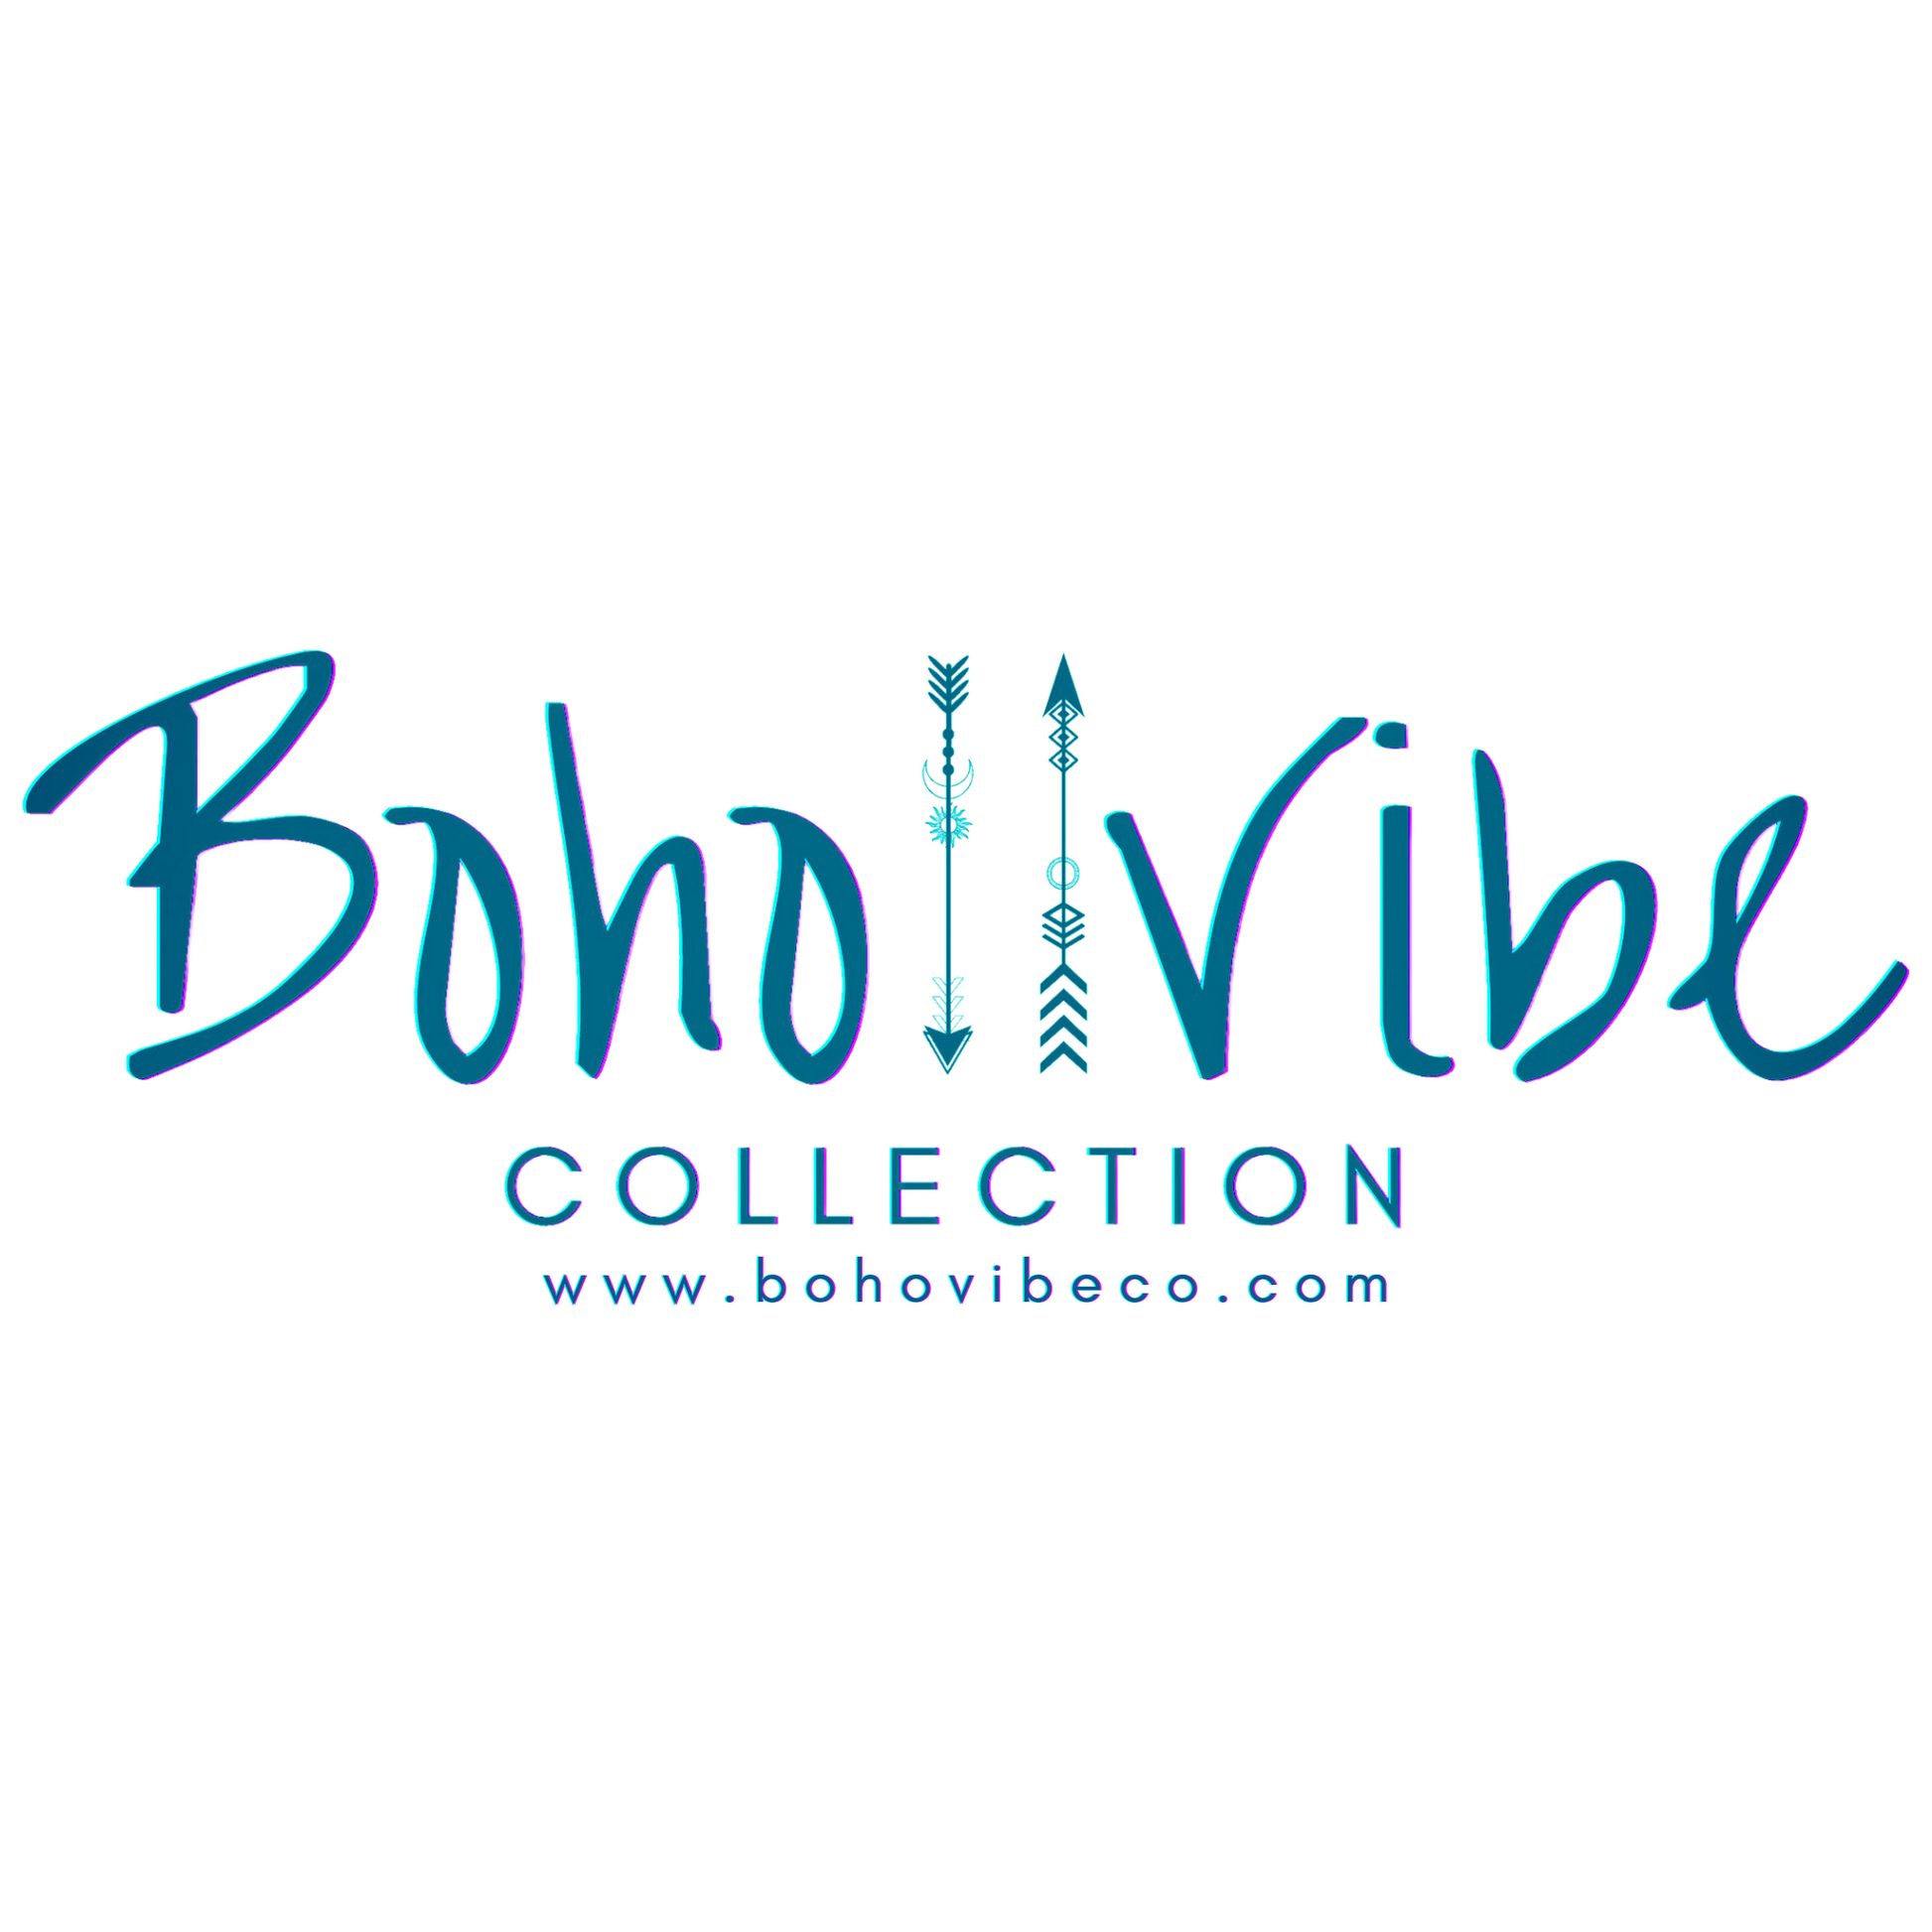 Boho ↡↟ Vibe Collection ↠ Purespa Light Brown Diffuser Set Essential Oil Burner Humidifier 13 Pack Oils with LED Night Light ↡